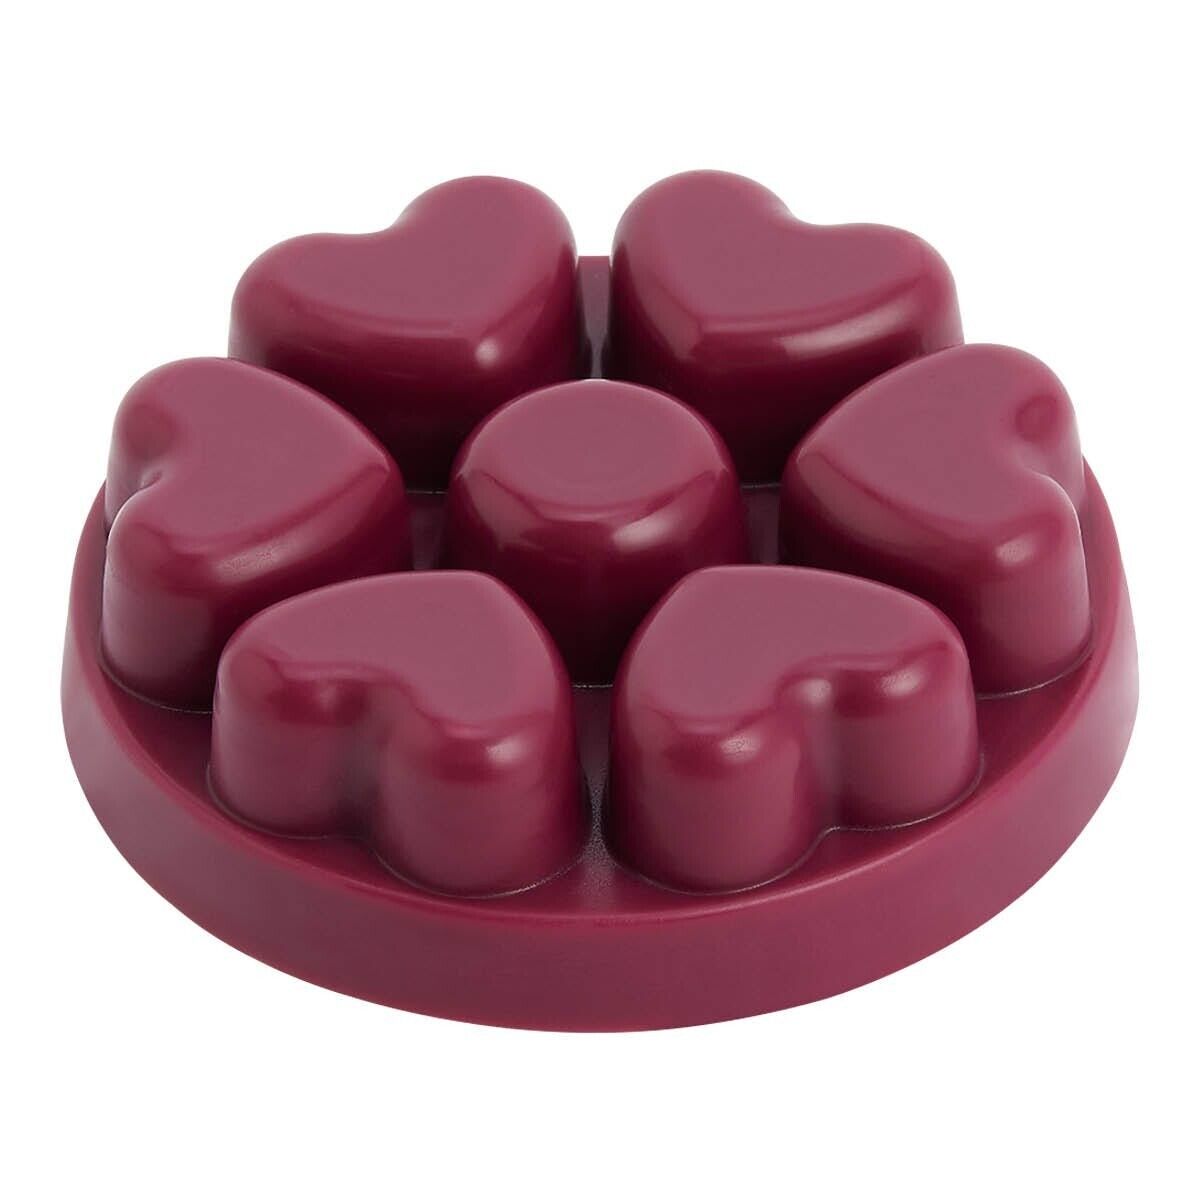 Partylite 1 box CRANBERRY THYME SCENT PLUS HEART Aroma Melts NEW  NIB